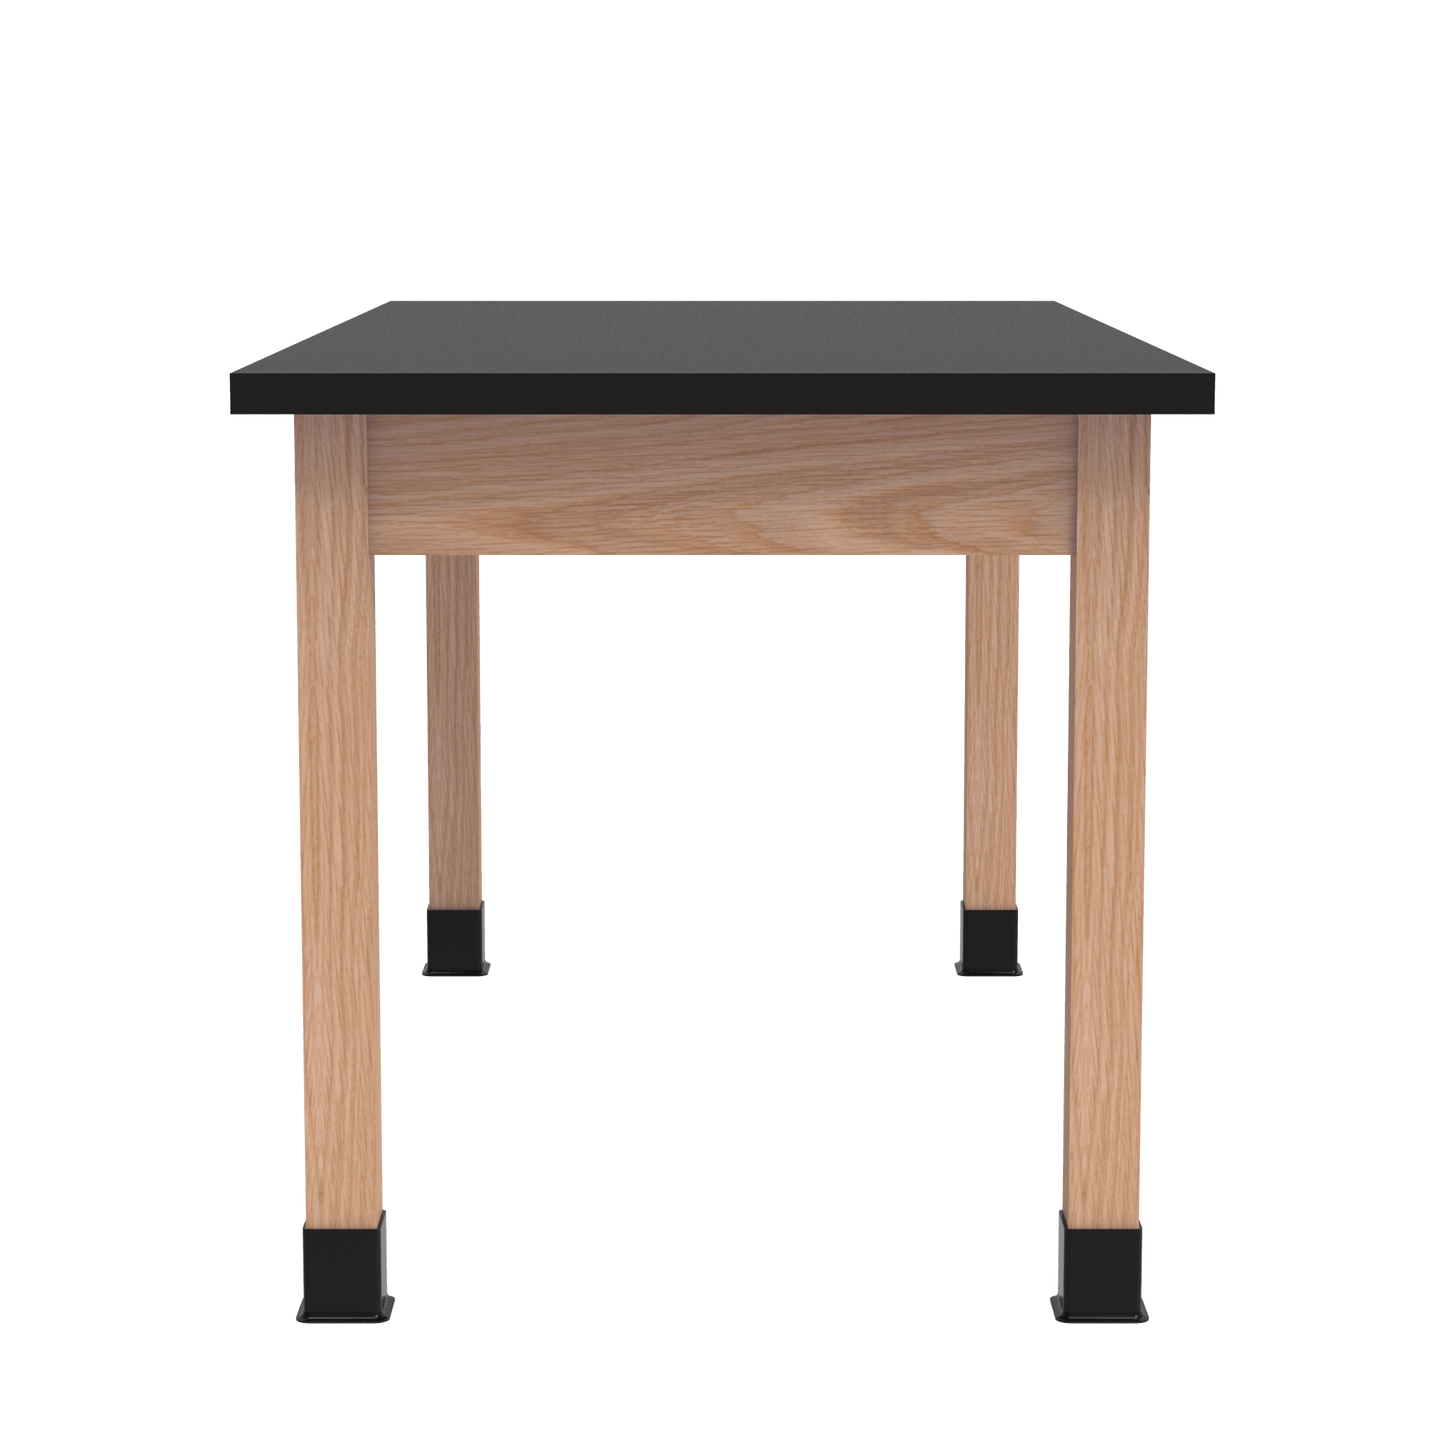 Diversified Woodcrafts Science Table w/ Book Compartment - 60" W x 42" D - Solid Oak Frame and Adjustable Glides - SchoolOutlet